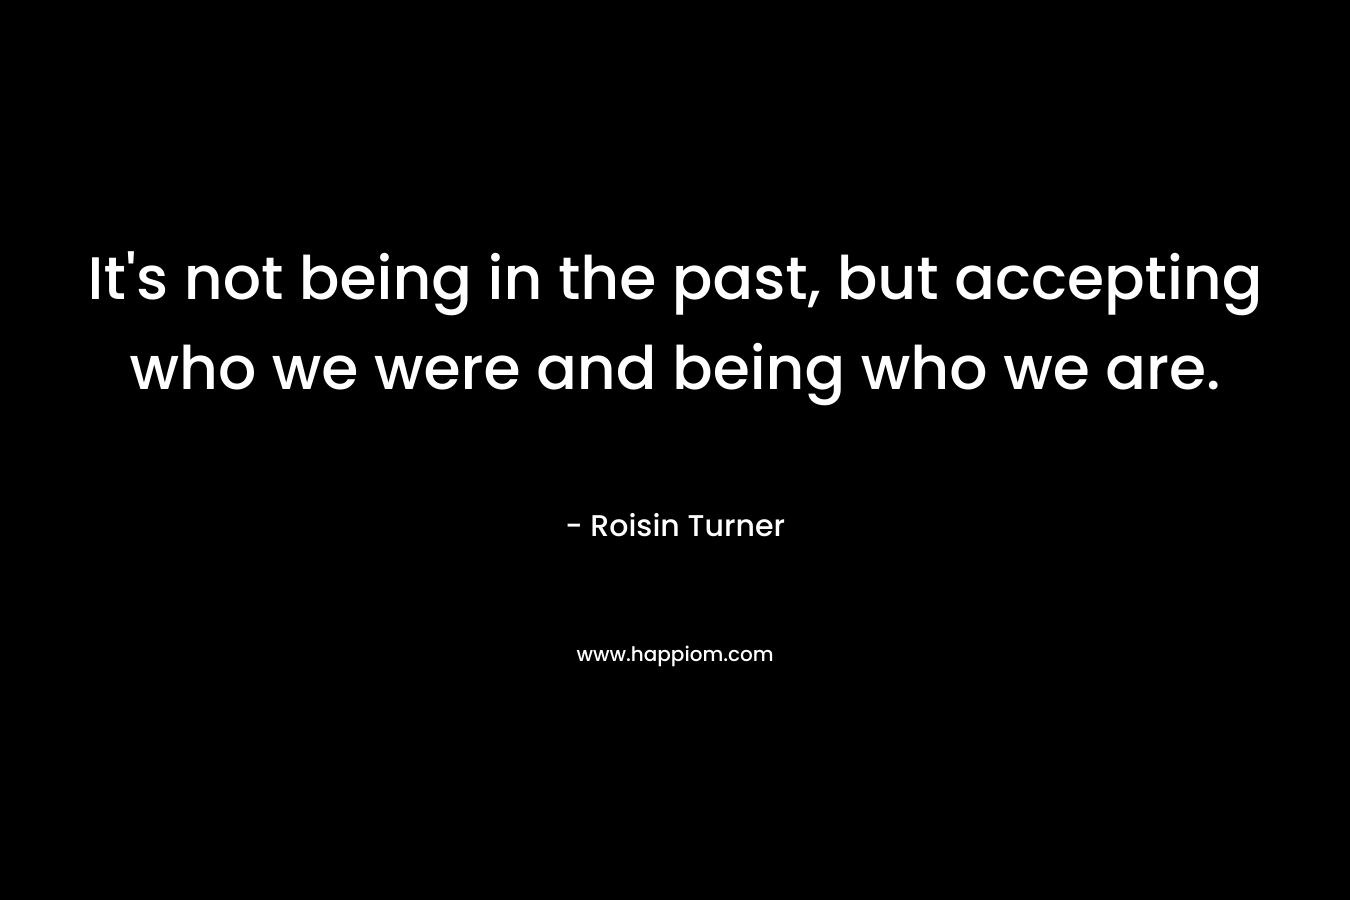 It's not being in the past, but accepting who we were and being who we are.